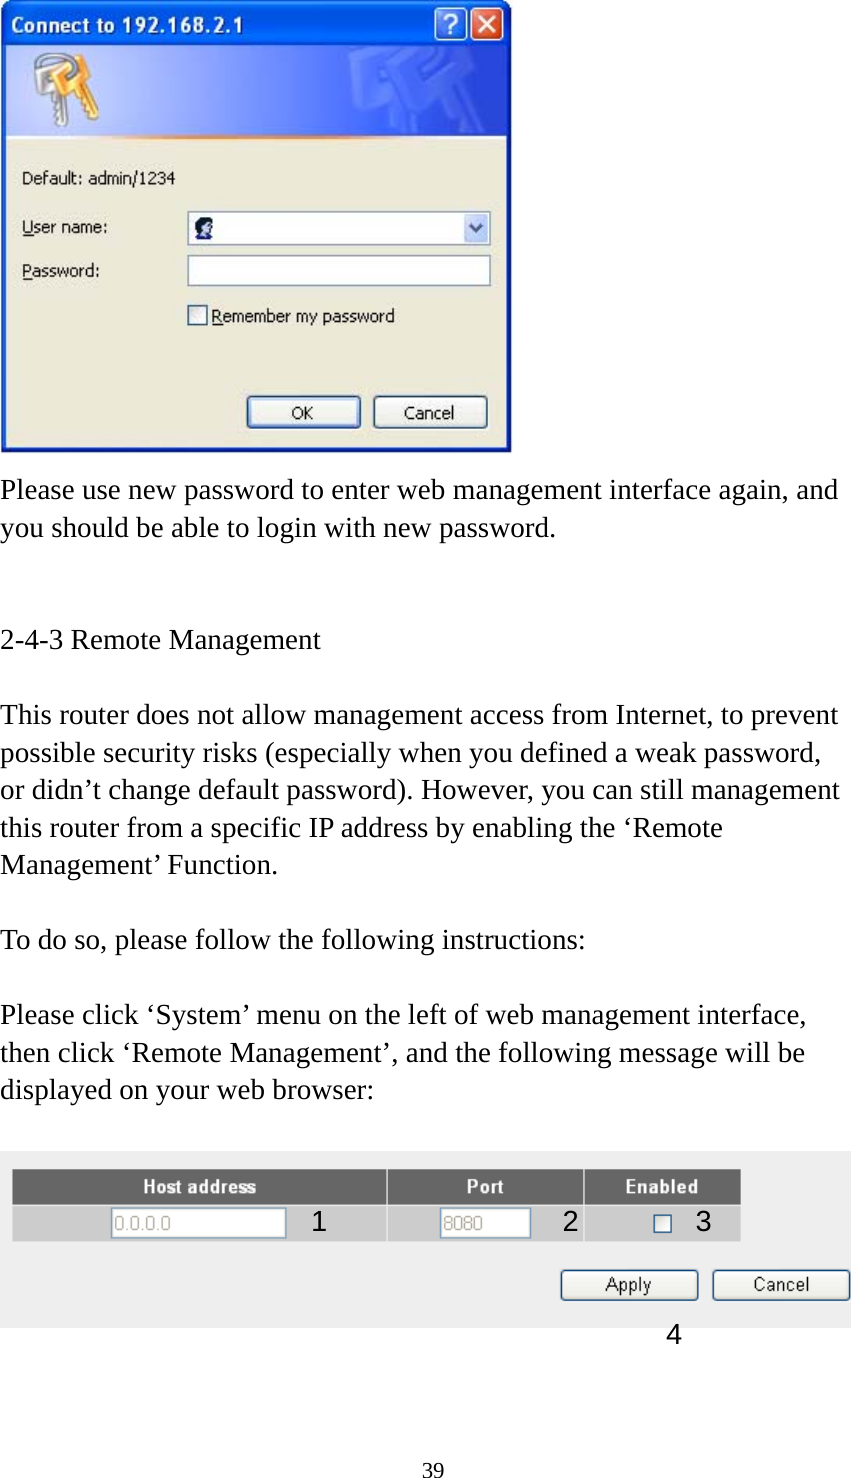 39  Please use new password to enter web management interface again, and you should be able to login with new password.   2-4-3 Remote Management  This router does not allow management access from Internet, to prevent possible security risks (especially when you defined a weak password, or didn’t change default password). However, you can still management this router from a specific IP address by enabling the ‘Remote Management’ Function.  To do so, please follow the following instructions:  Please click ‘System’ menu on the left of web management interface, then click ‘Remote Management’, and the following message will be displayed on your web browser:     1234